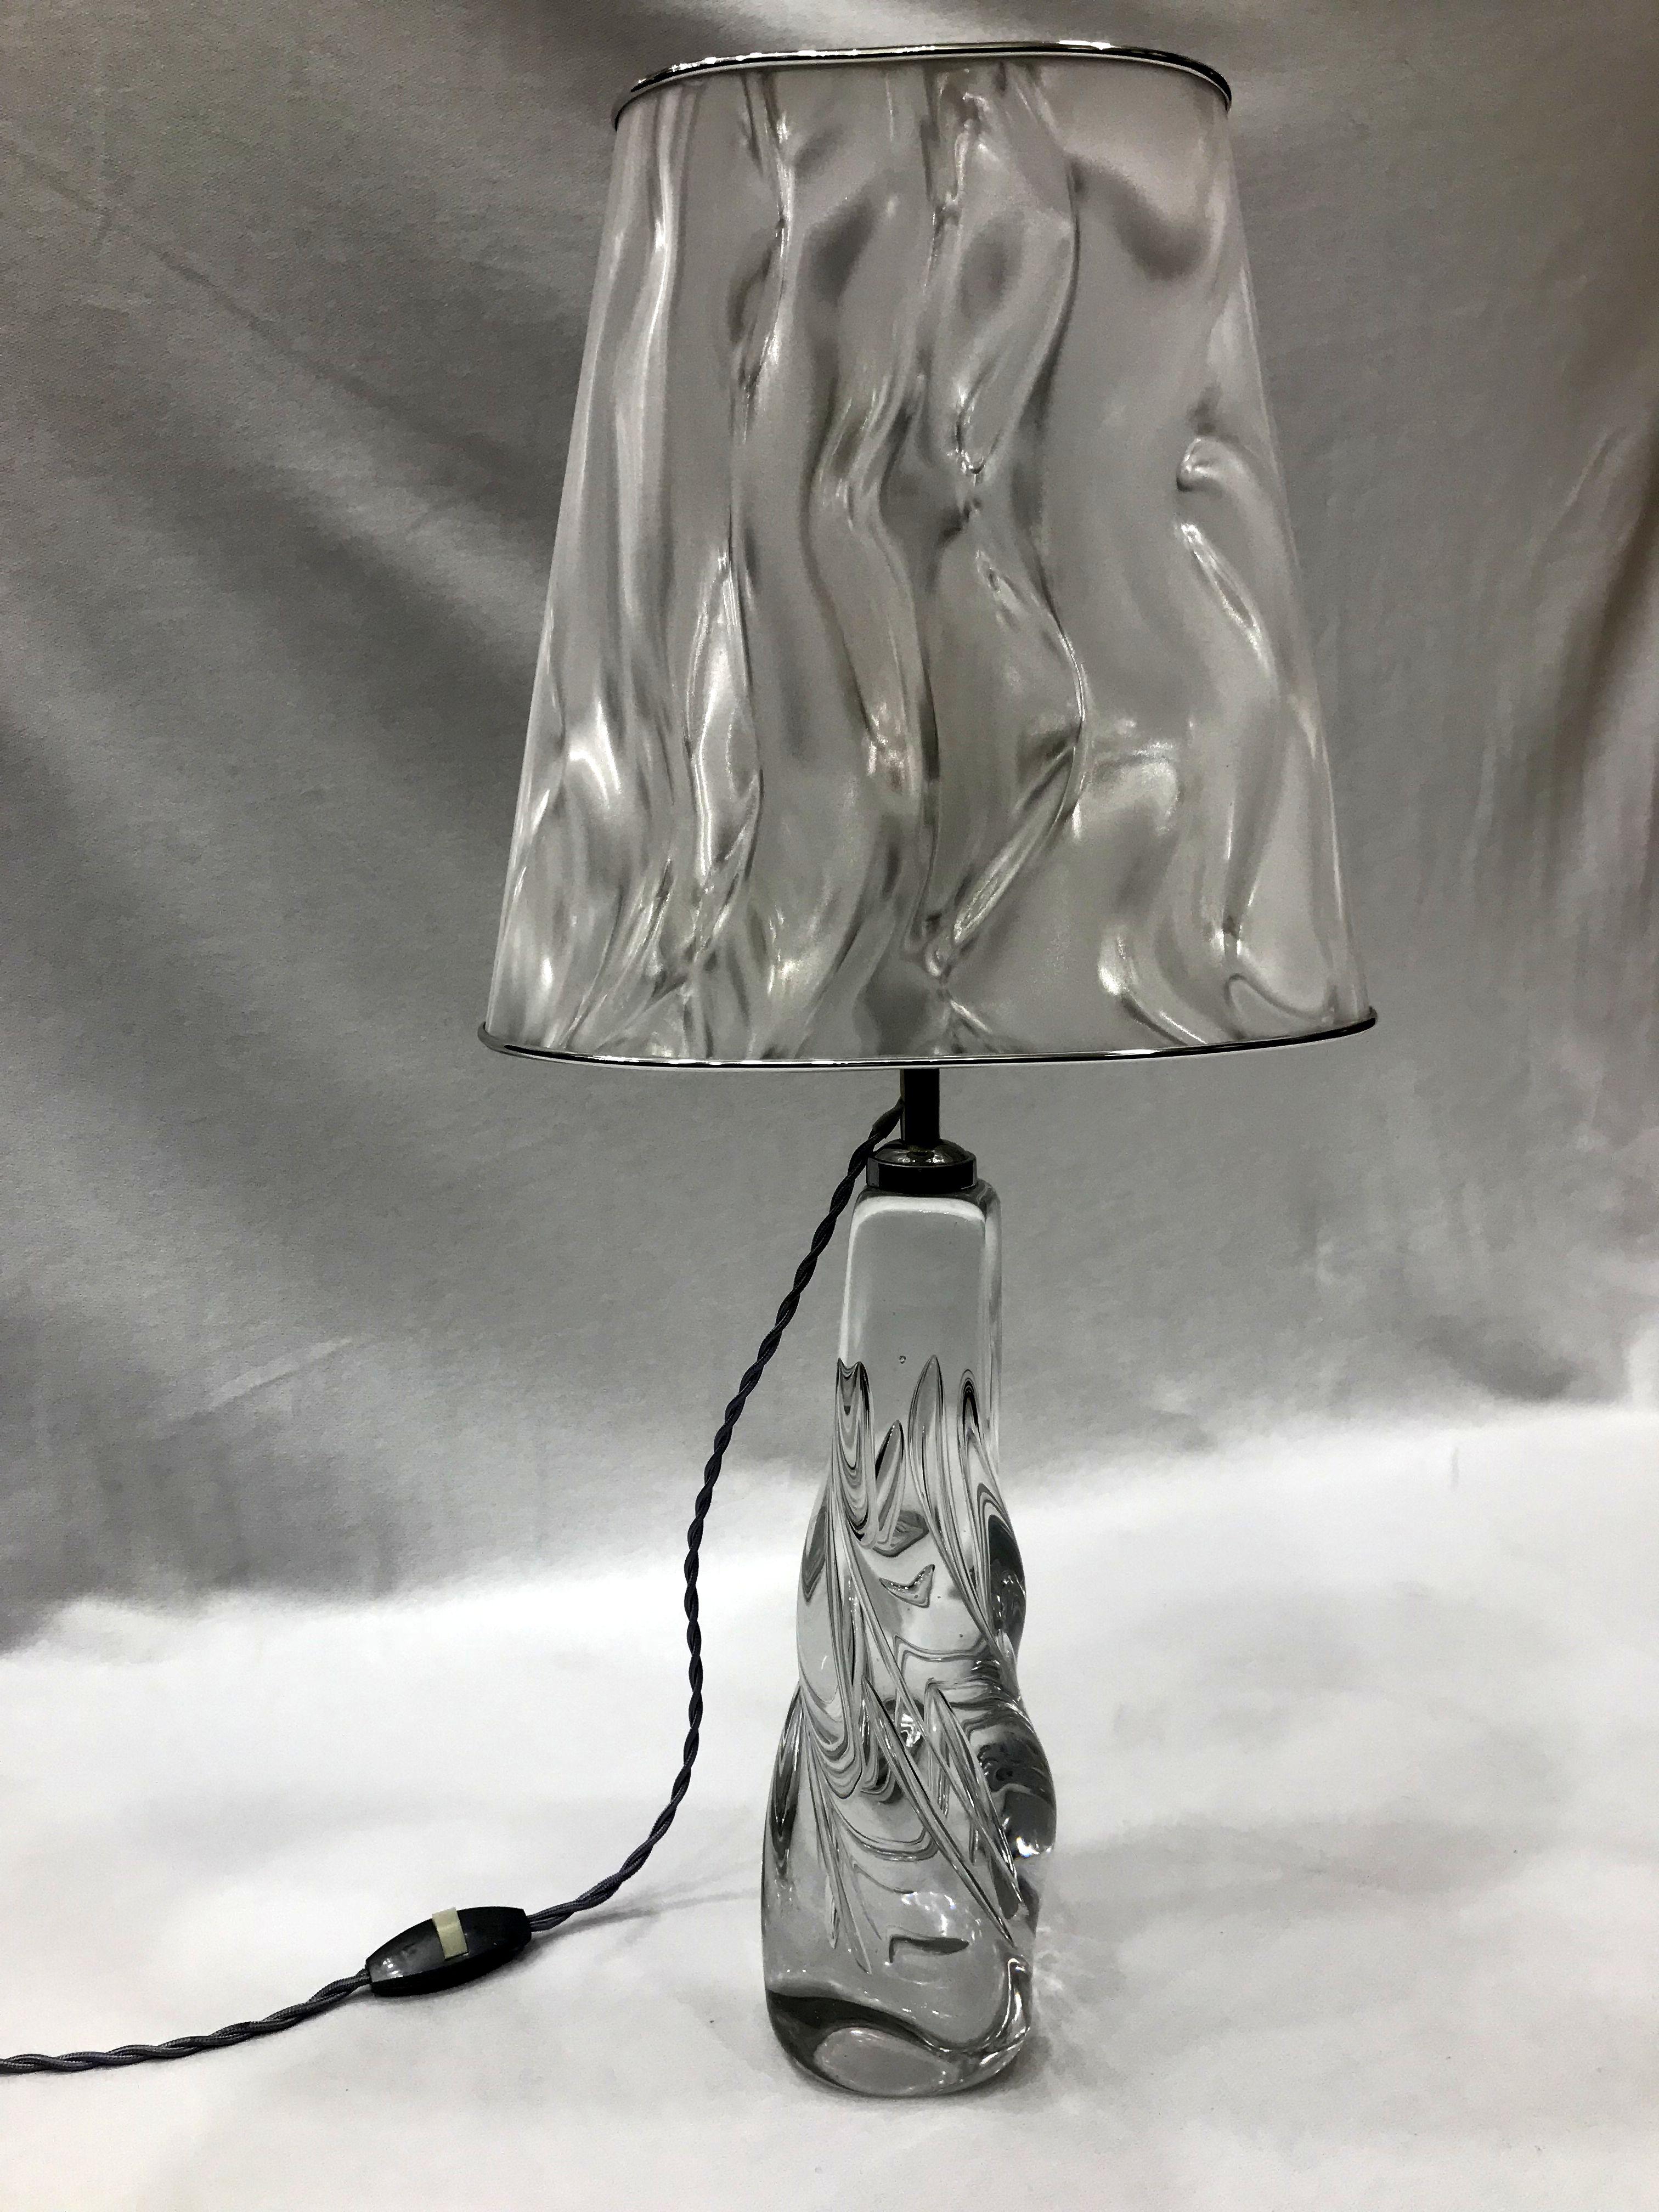 Beautiful crystal lamp from France was made by famous Schneider glass-work. Newly rewired with new unique special plastic shade. From period 1970-1981. Shades are available in different colors, black or white also. Measurements of base D=9 cm, H=33